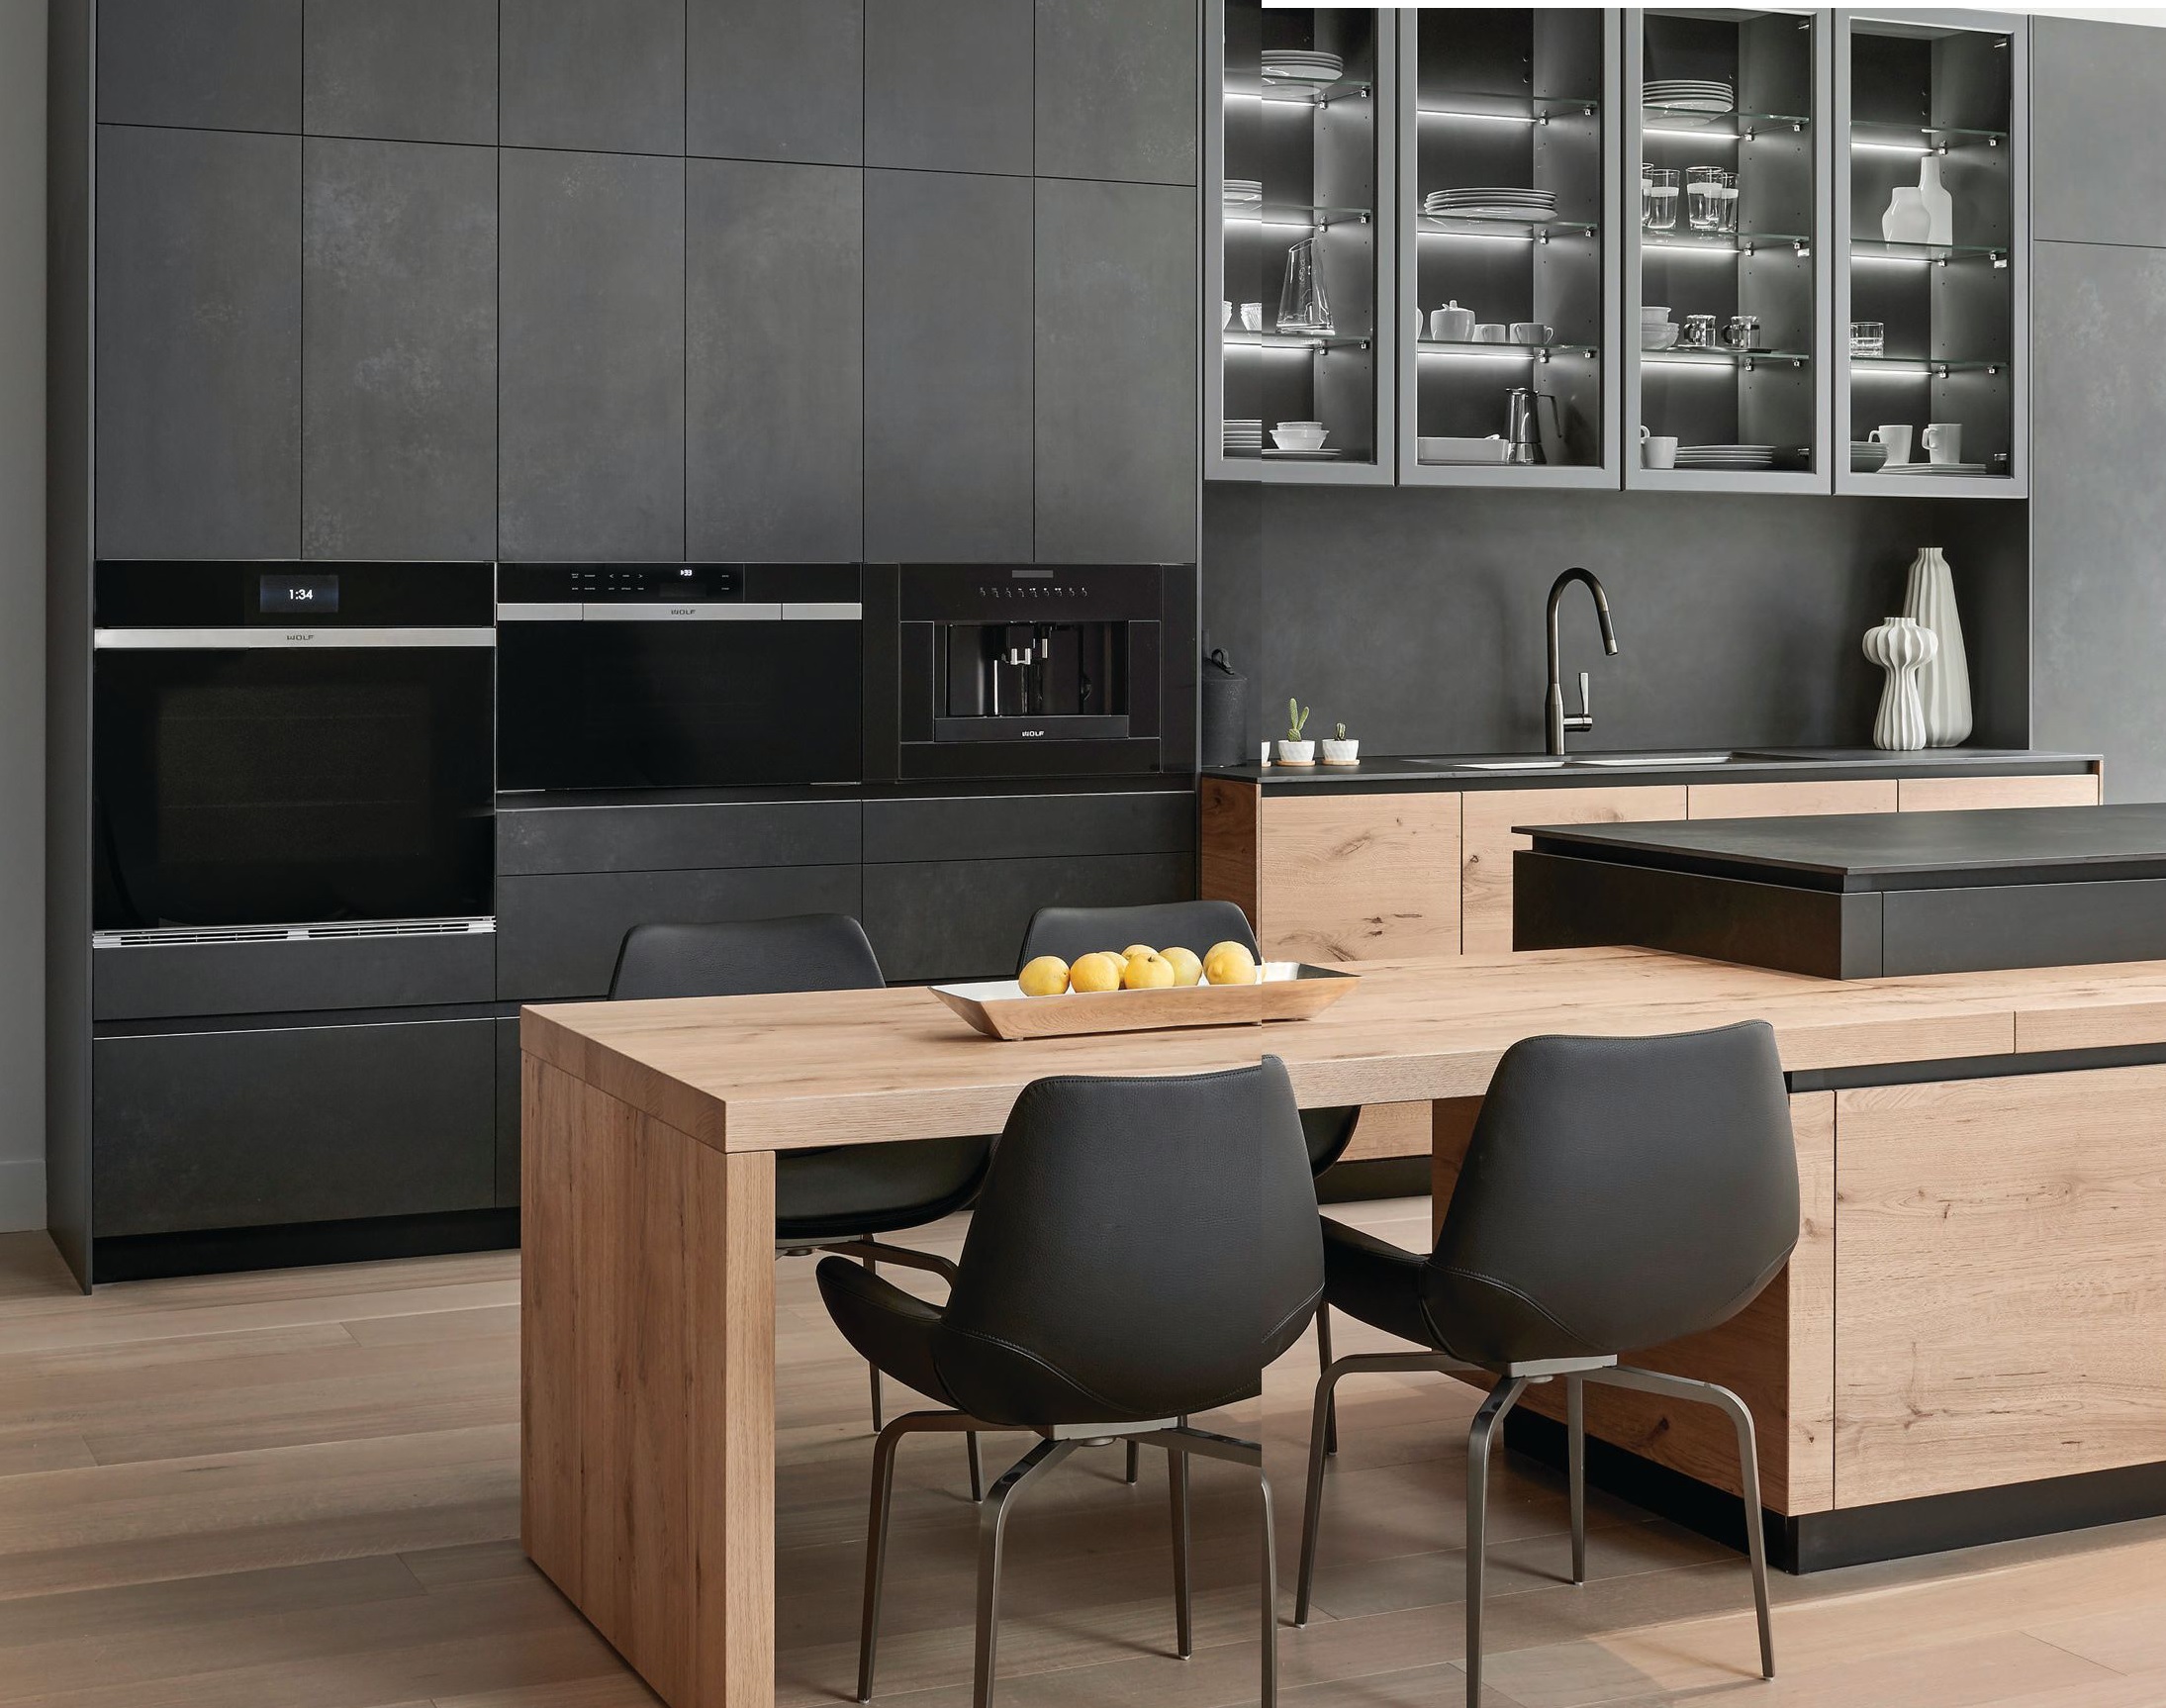 Design House’s offerings include this eye-popping Snaidero ELEGANTE
Bespoke luxury modern kitchen in the custom combo of Heartwood and Ossido
Nero ceramic finishes